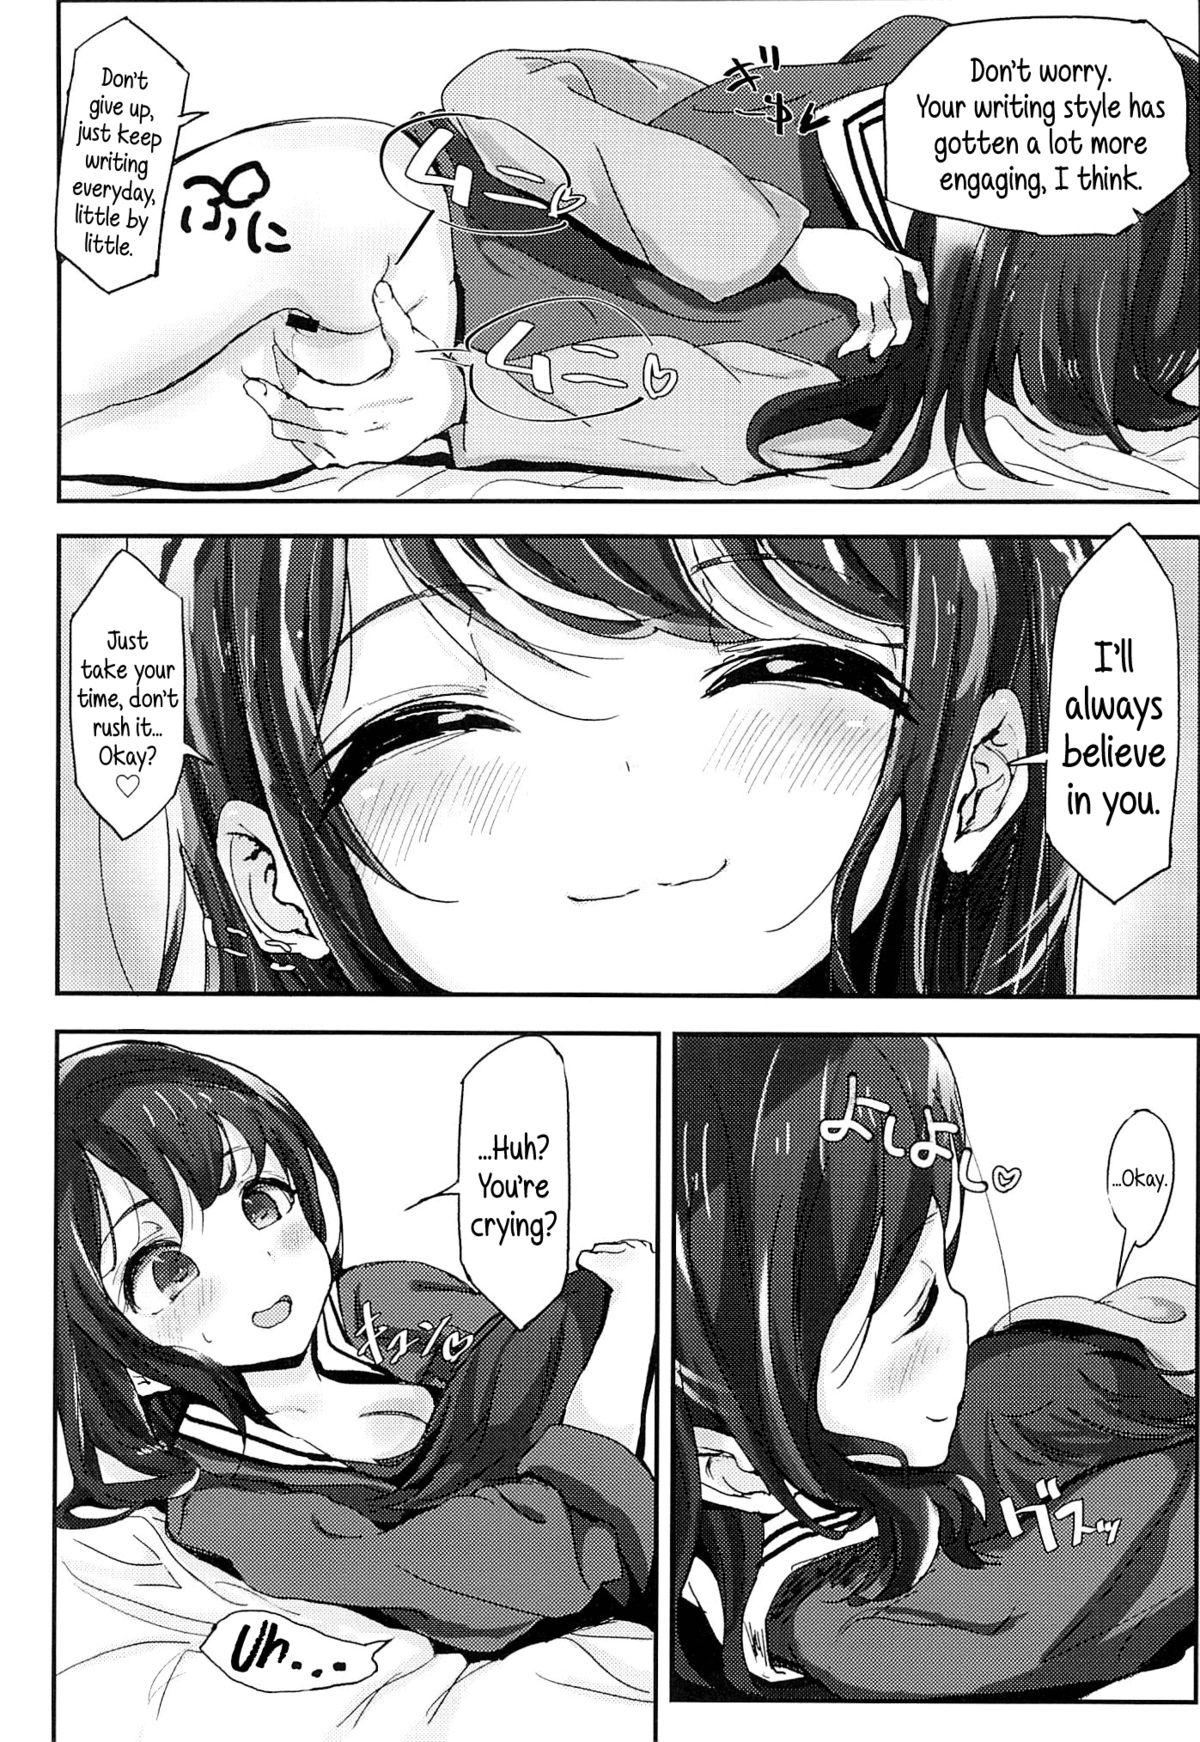 Free 18 Year Old Porn Shikyuukou no Kanata, Onii chan no Hate | Beyond the mouth of the uterus lies Onii-chan’s demise Webcamsex - Page 11